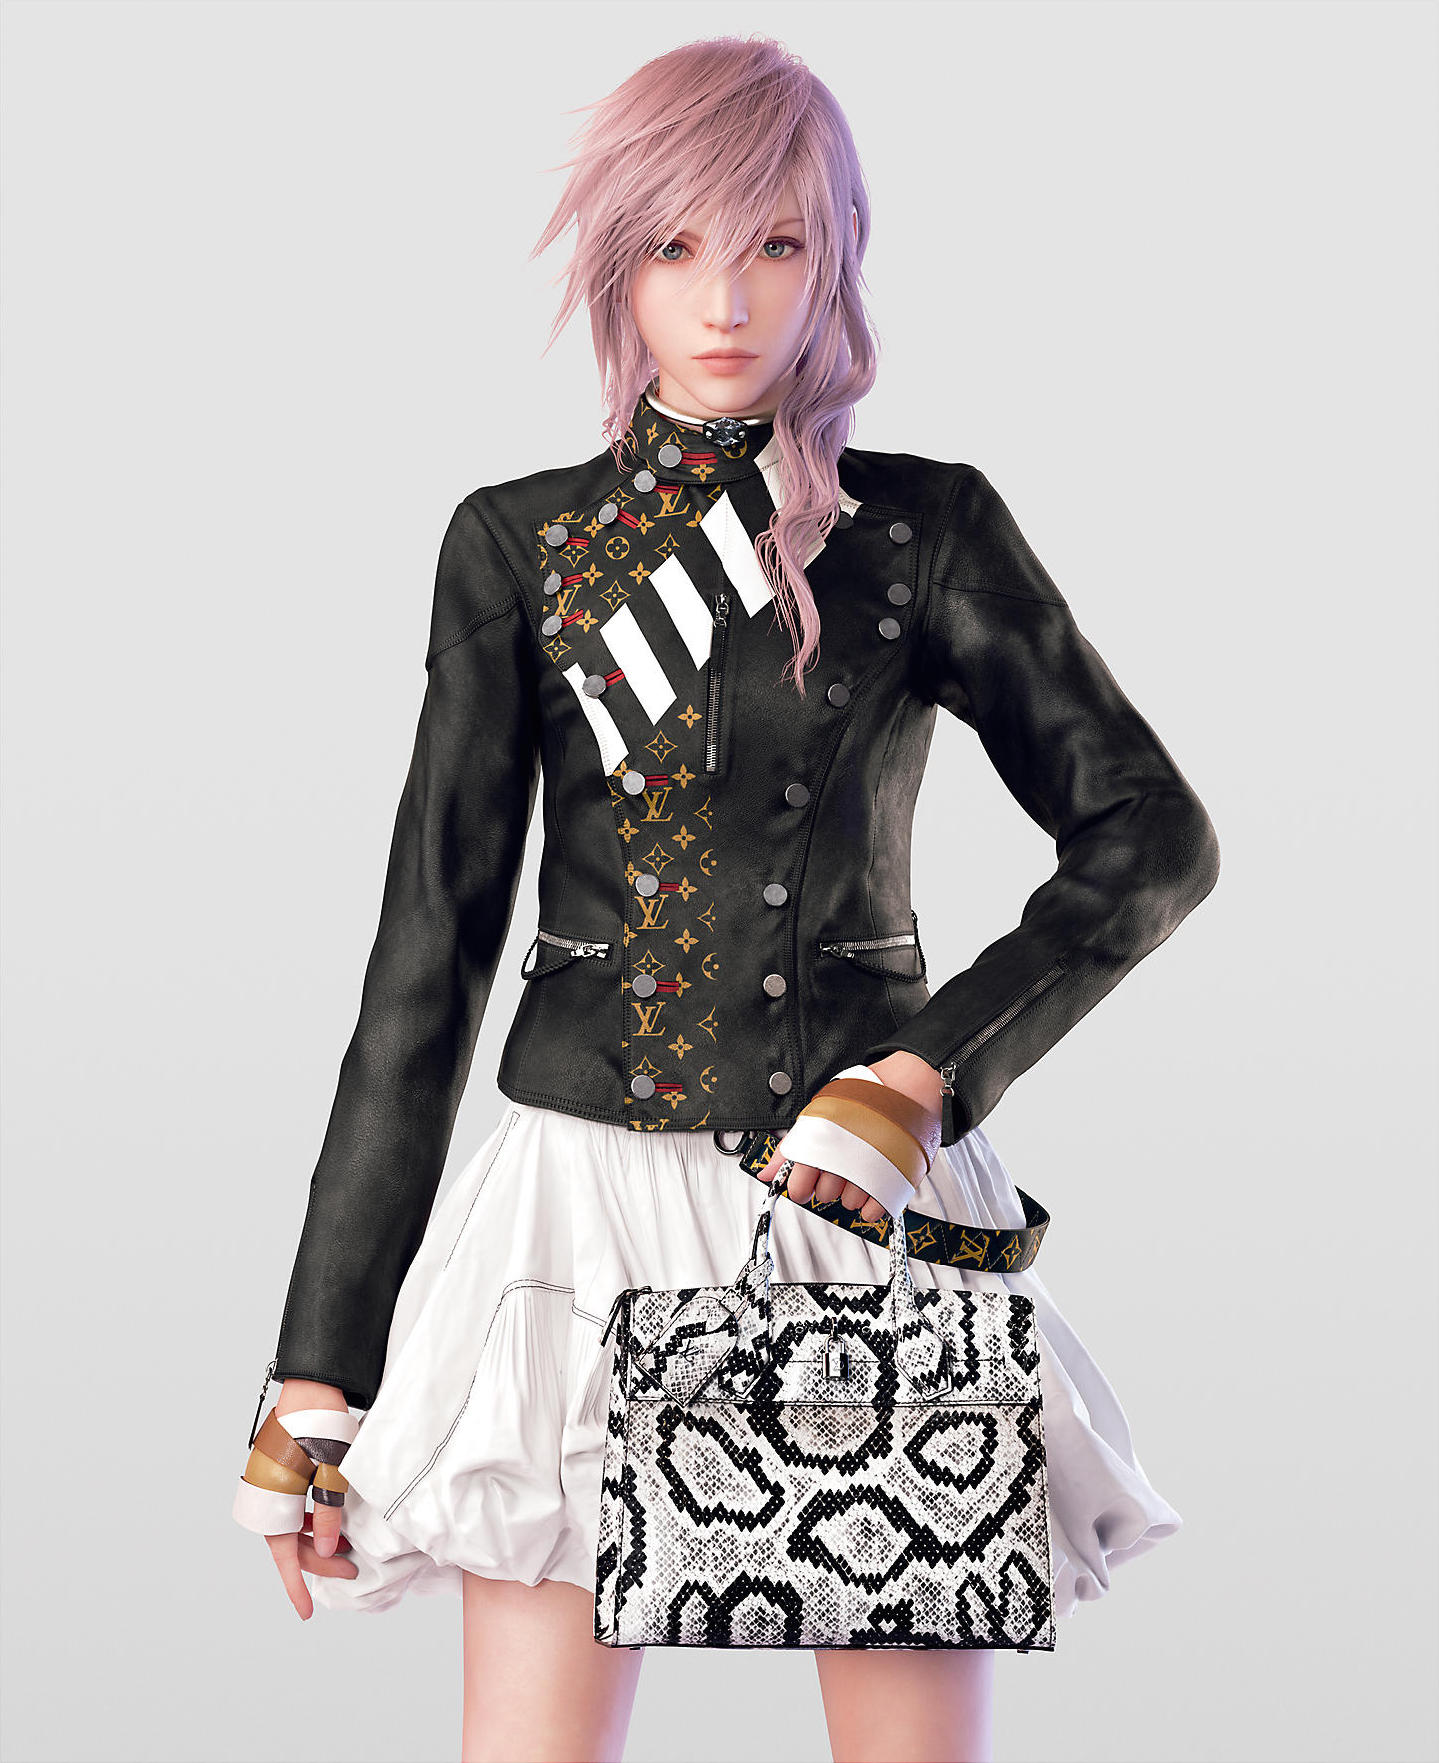 Louis Vuitton Series 4 Campaign Features Final Fantasy Character As Its Muse | www.bagssaleusa.com